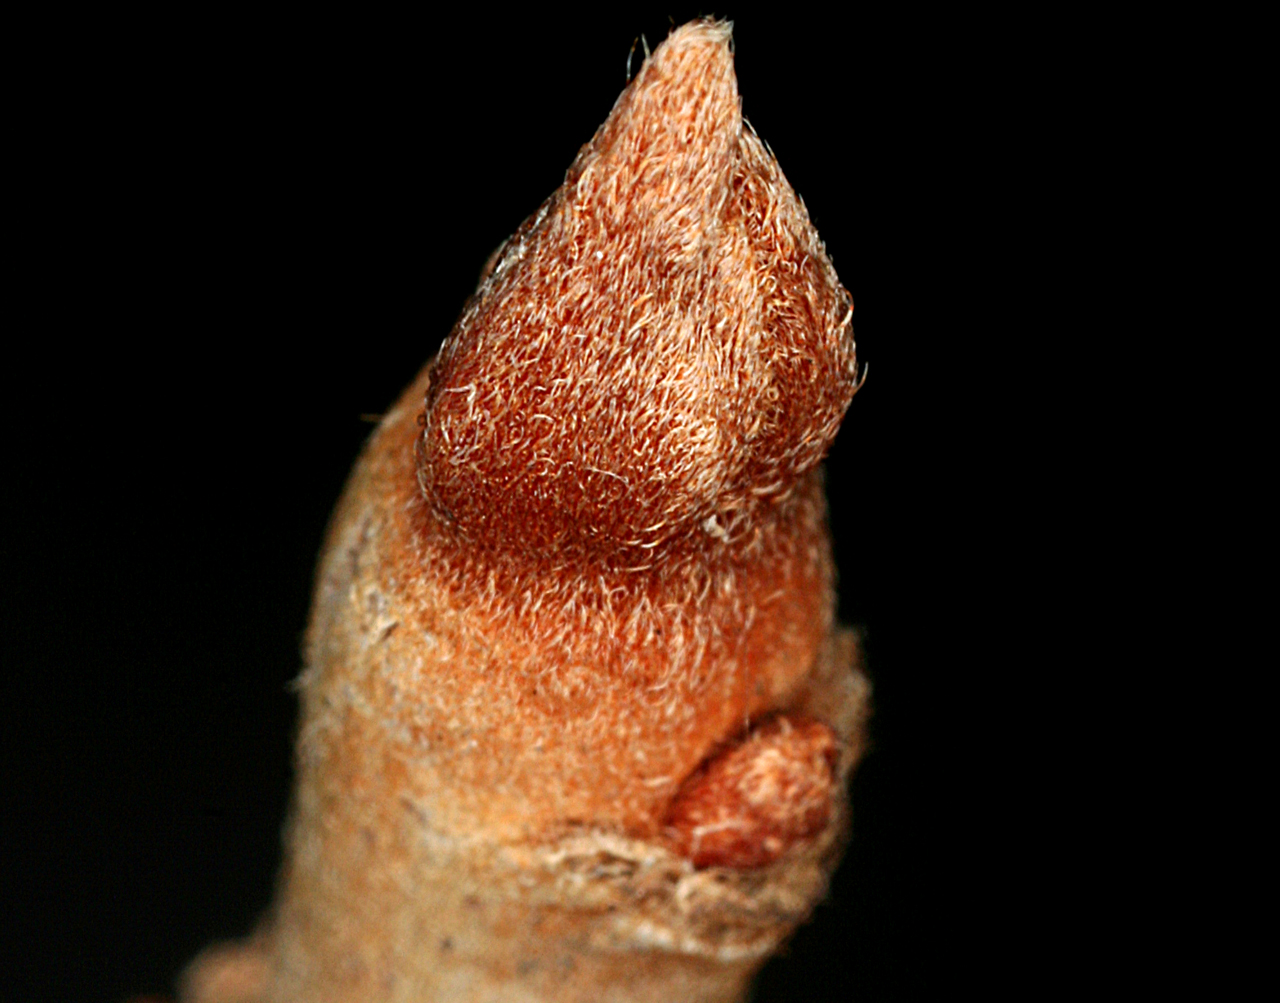 Tip of the stem, which has a red bud and a leaf scar